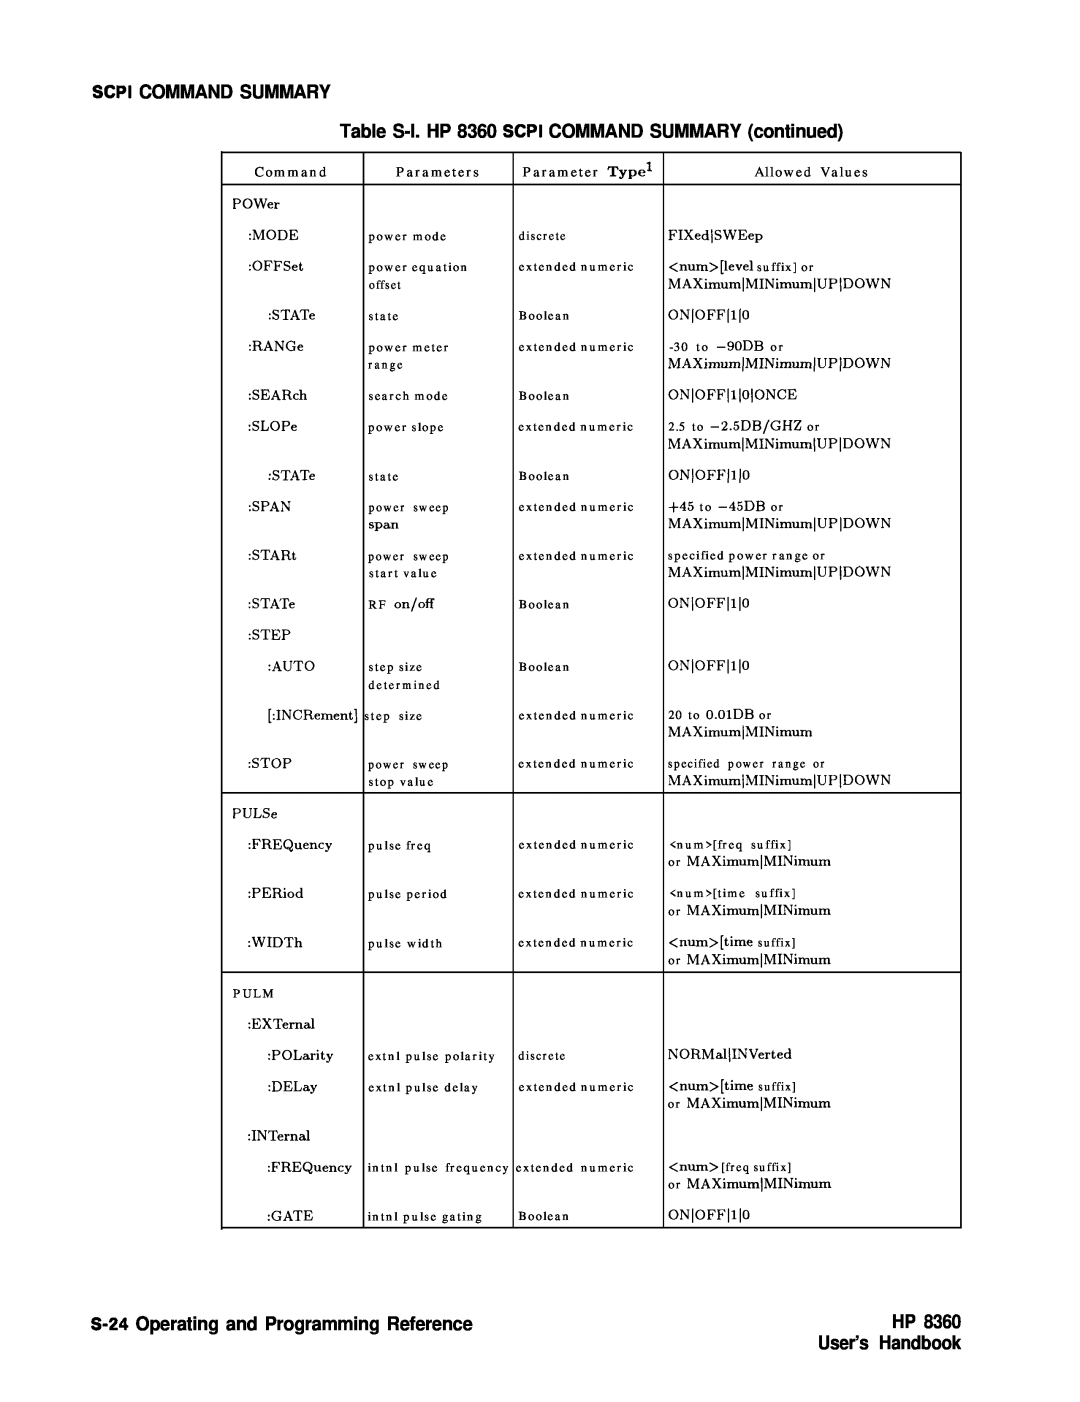 HP 24A Scpi Command Summary, Table S-l. HP 8360 SCPI COMMAND SUMMARY continued, S-24 Operating and Programming Reference 